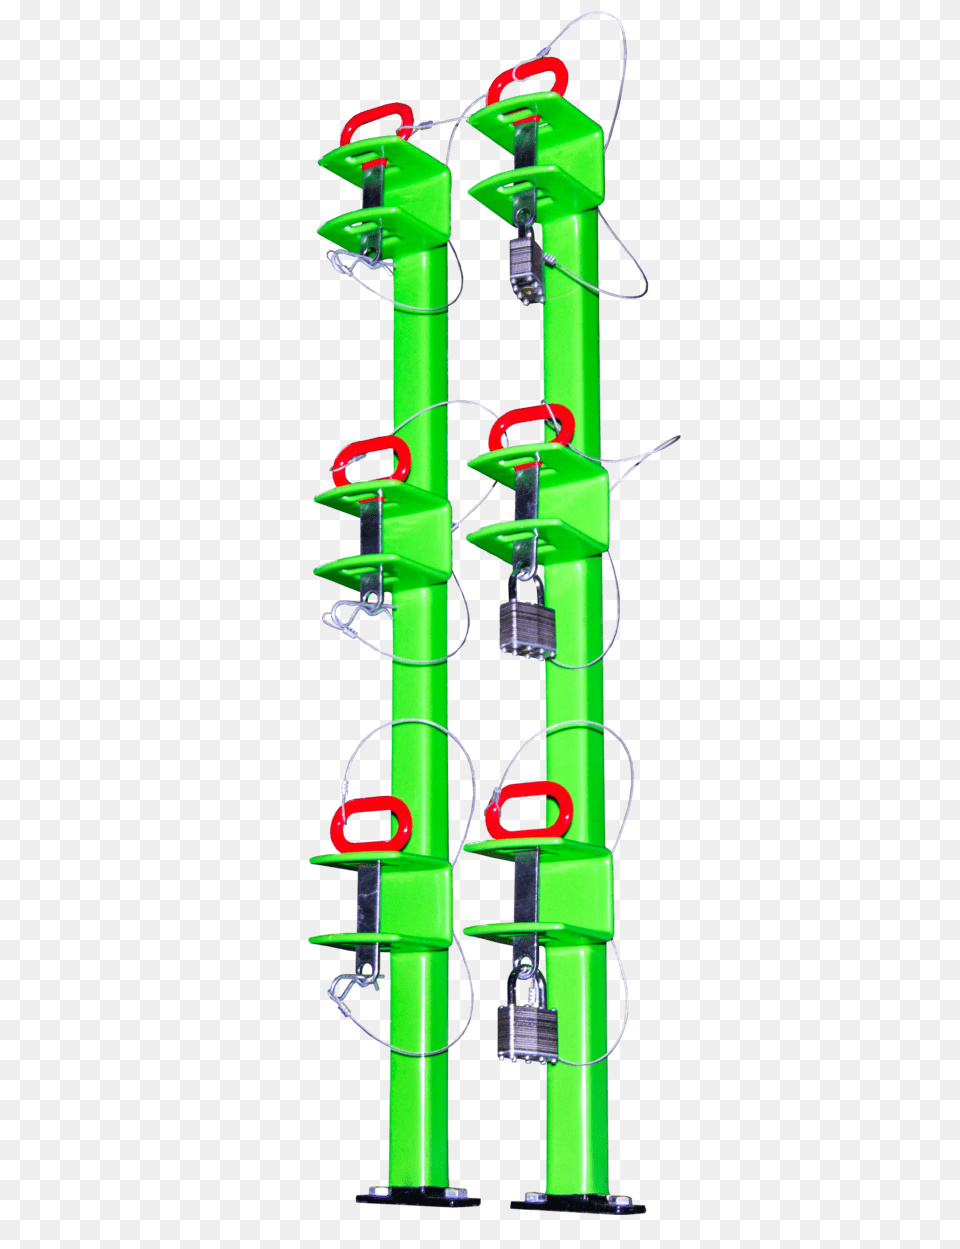 All Tagged Weed Eater Rack, Coil, Spiral, Dynamite, Weapon Free Png Download